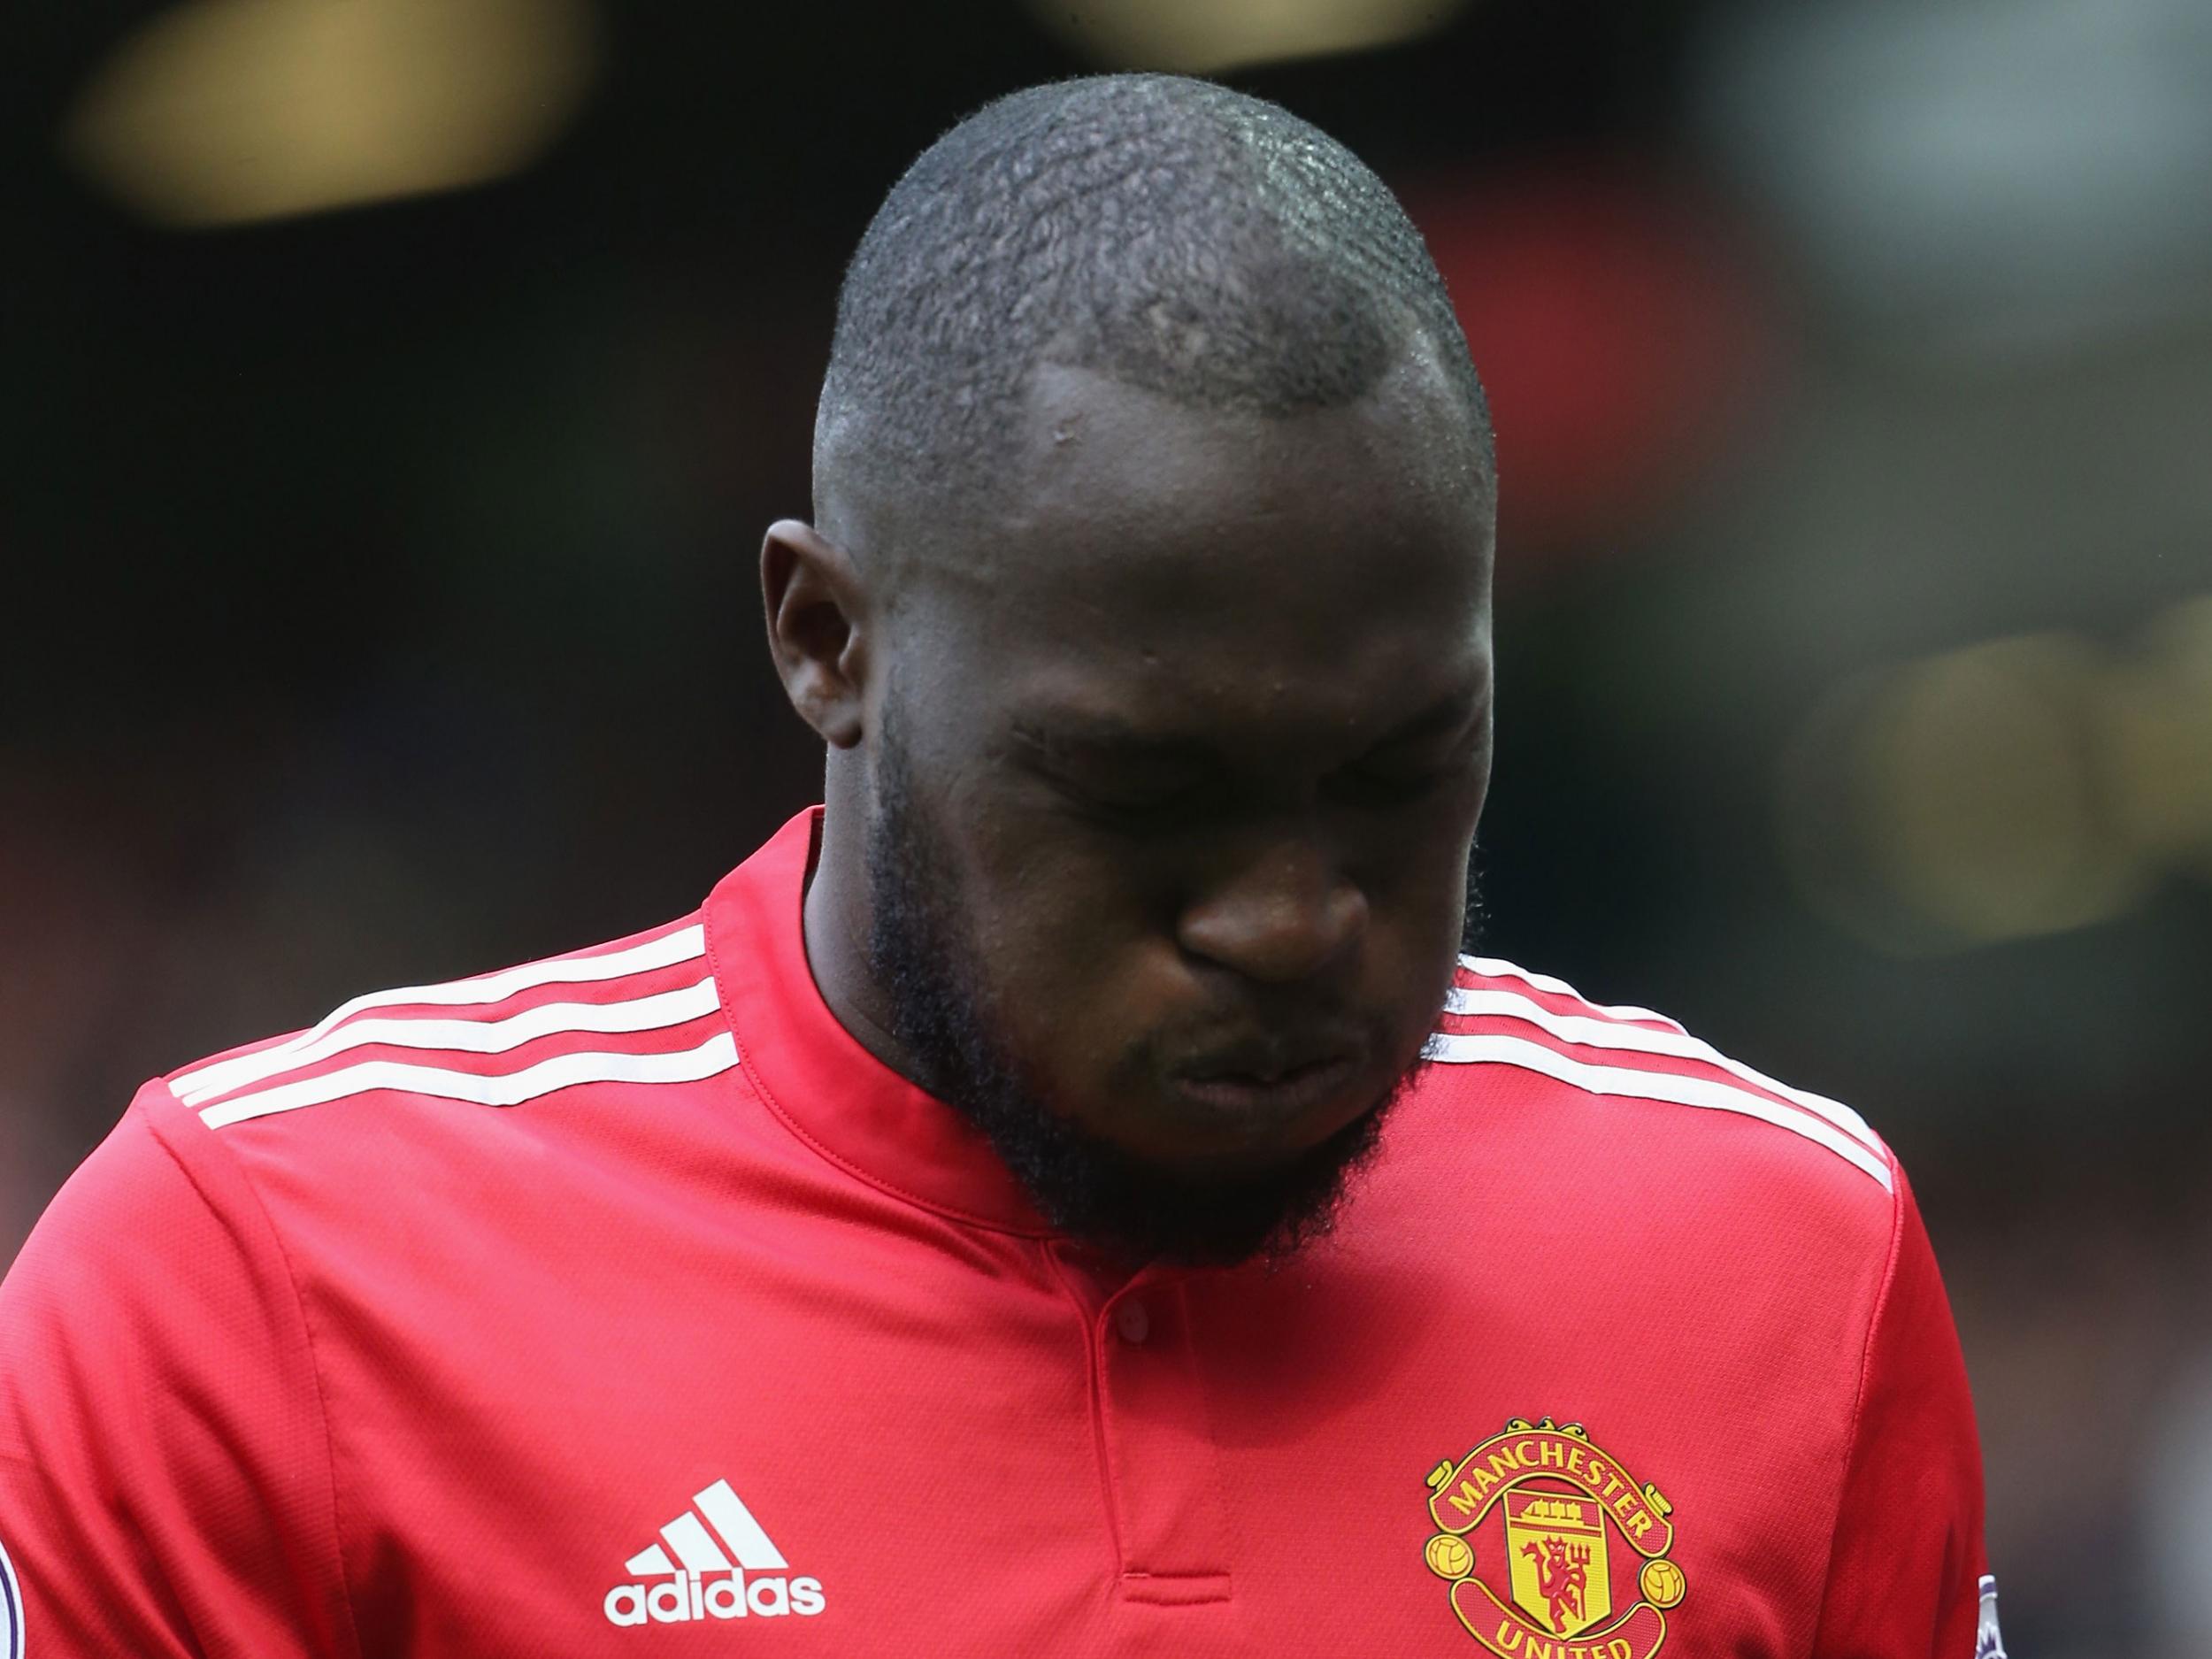 Romelu Lukaku and Manchester United must play to striker&apos;s strengths to build on &apos;brilliant&apos; season, says Andy Cole